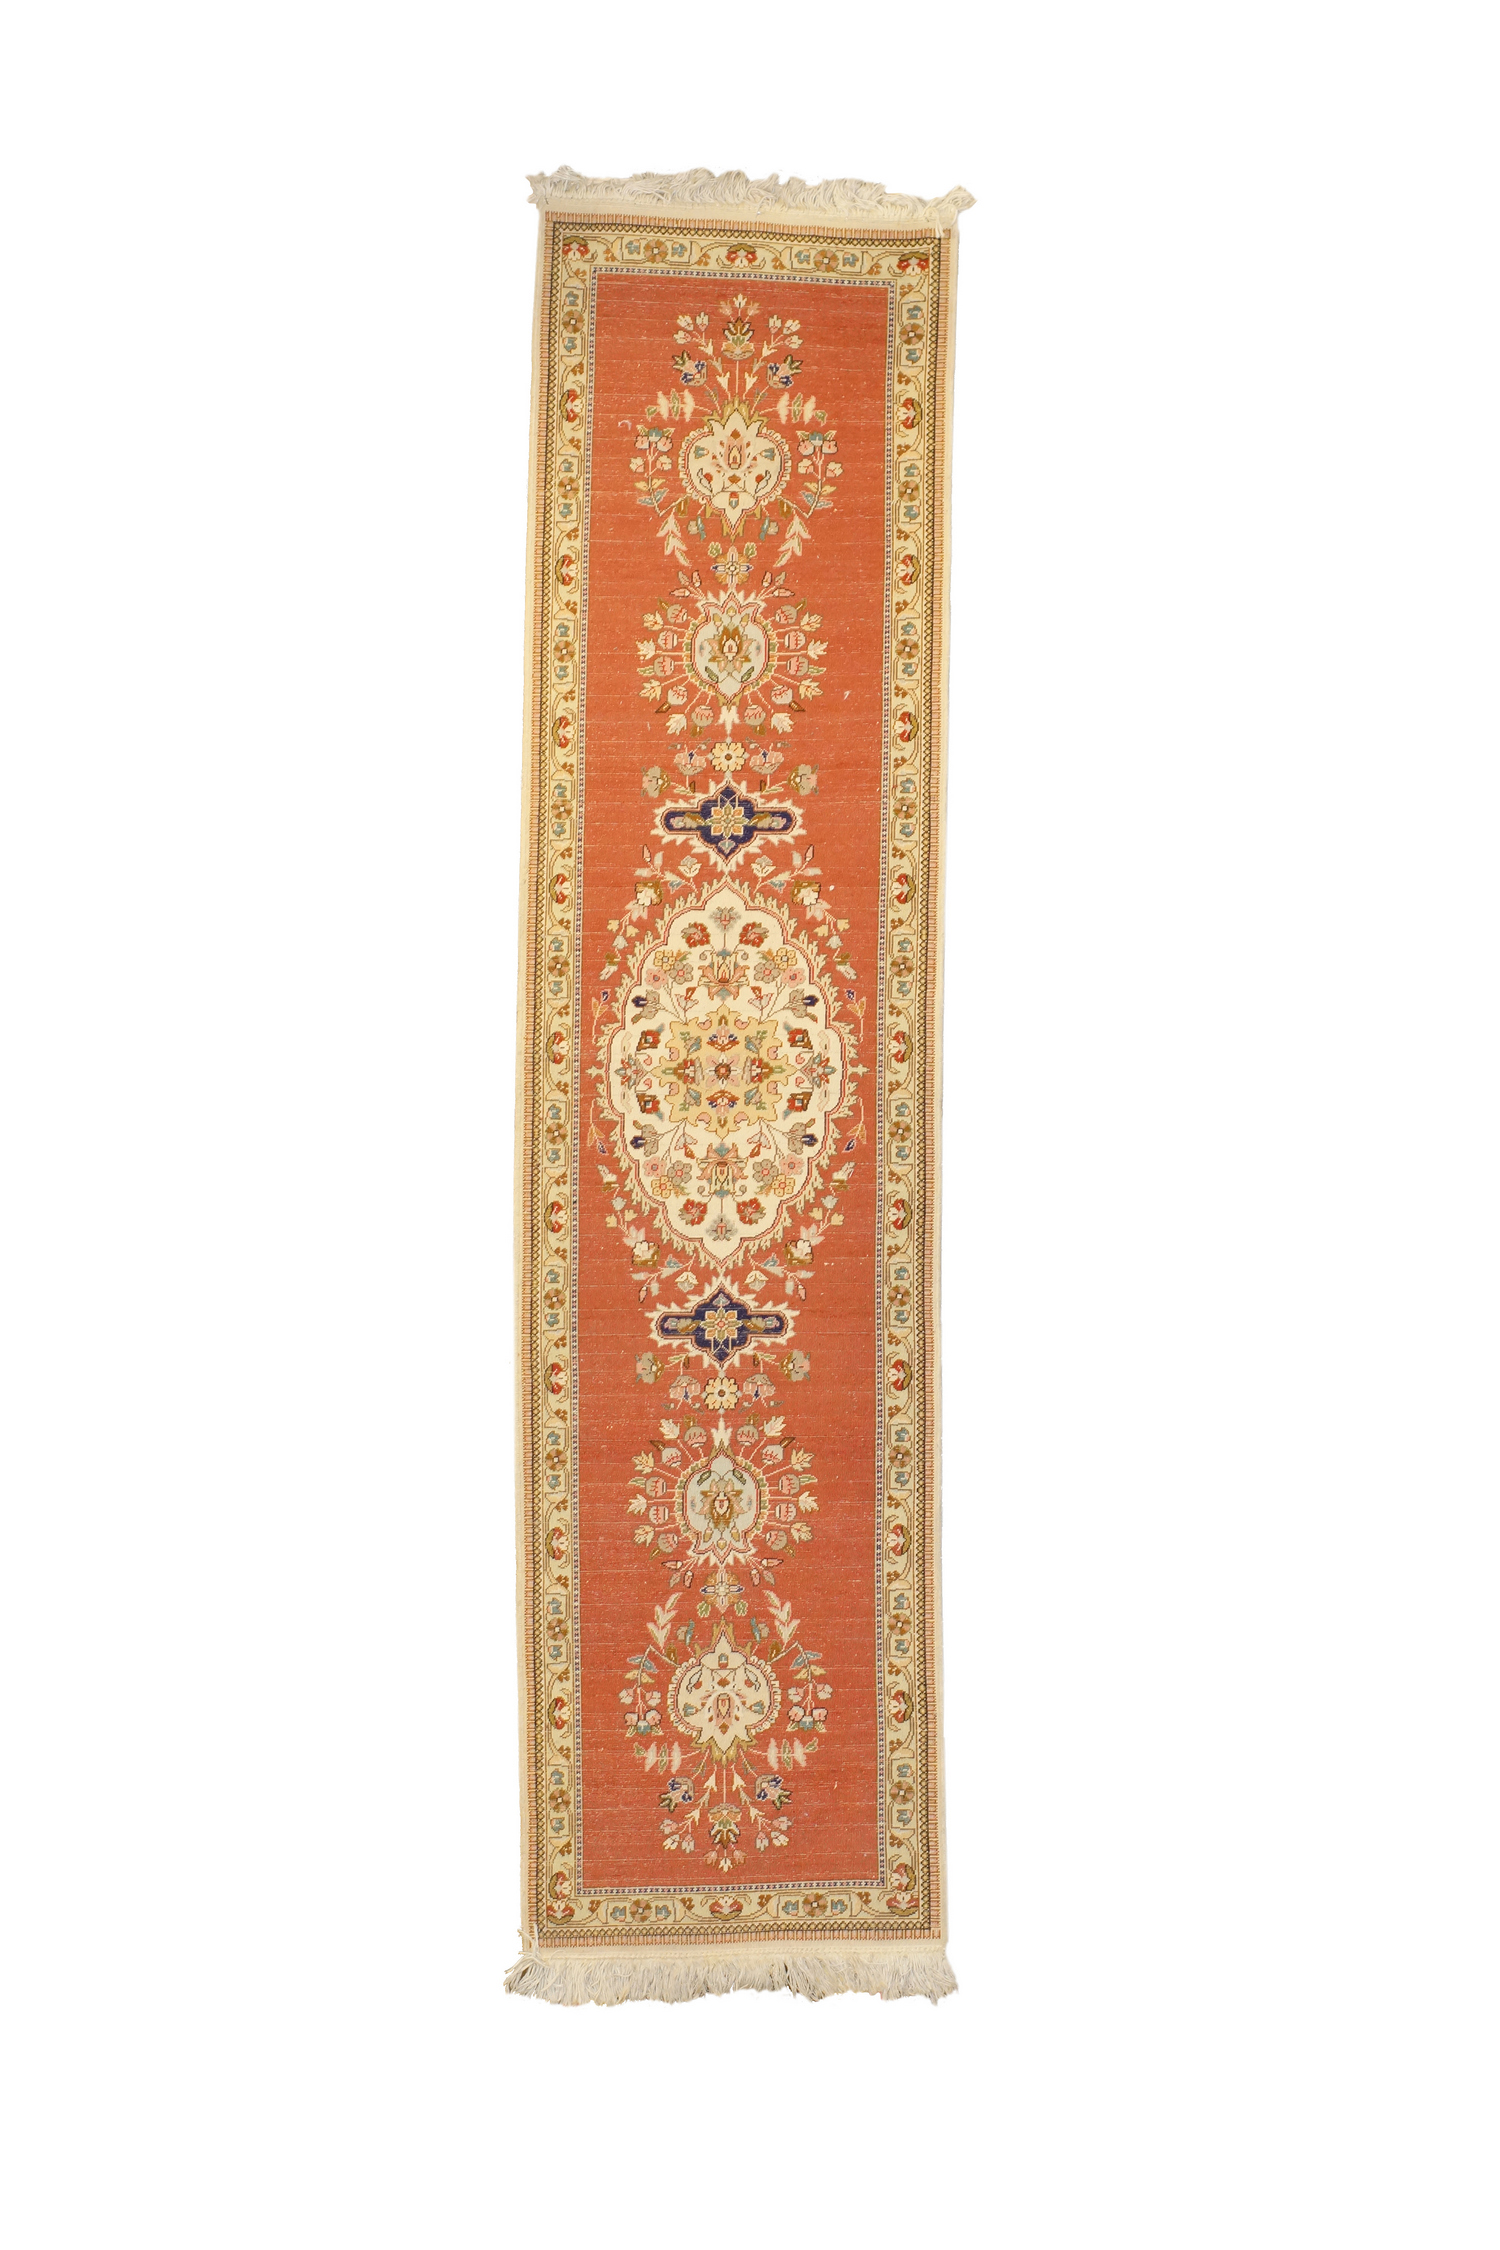 A VINTAGE PERSIAN HAND-WOVEN CARPET RUNNER PIC-0